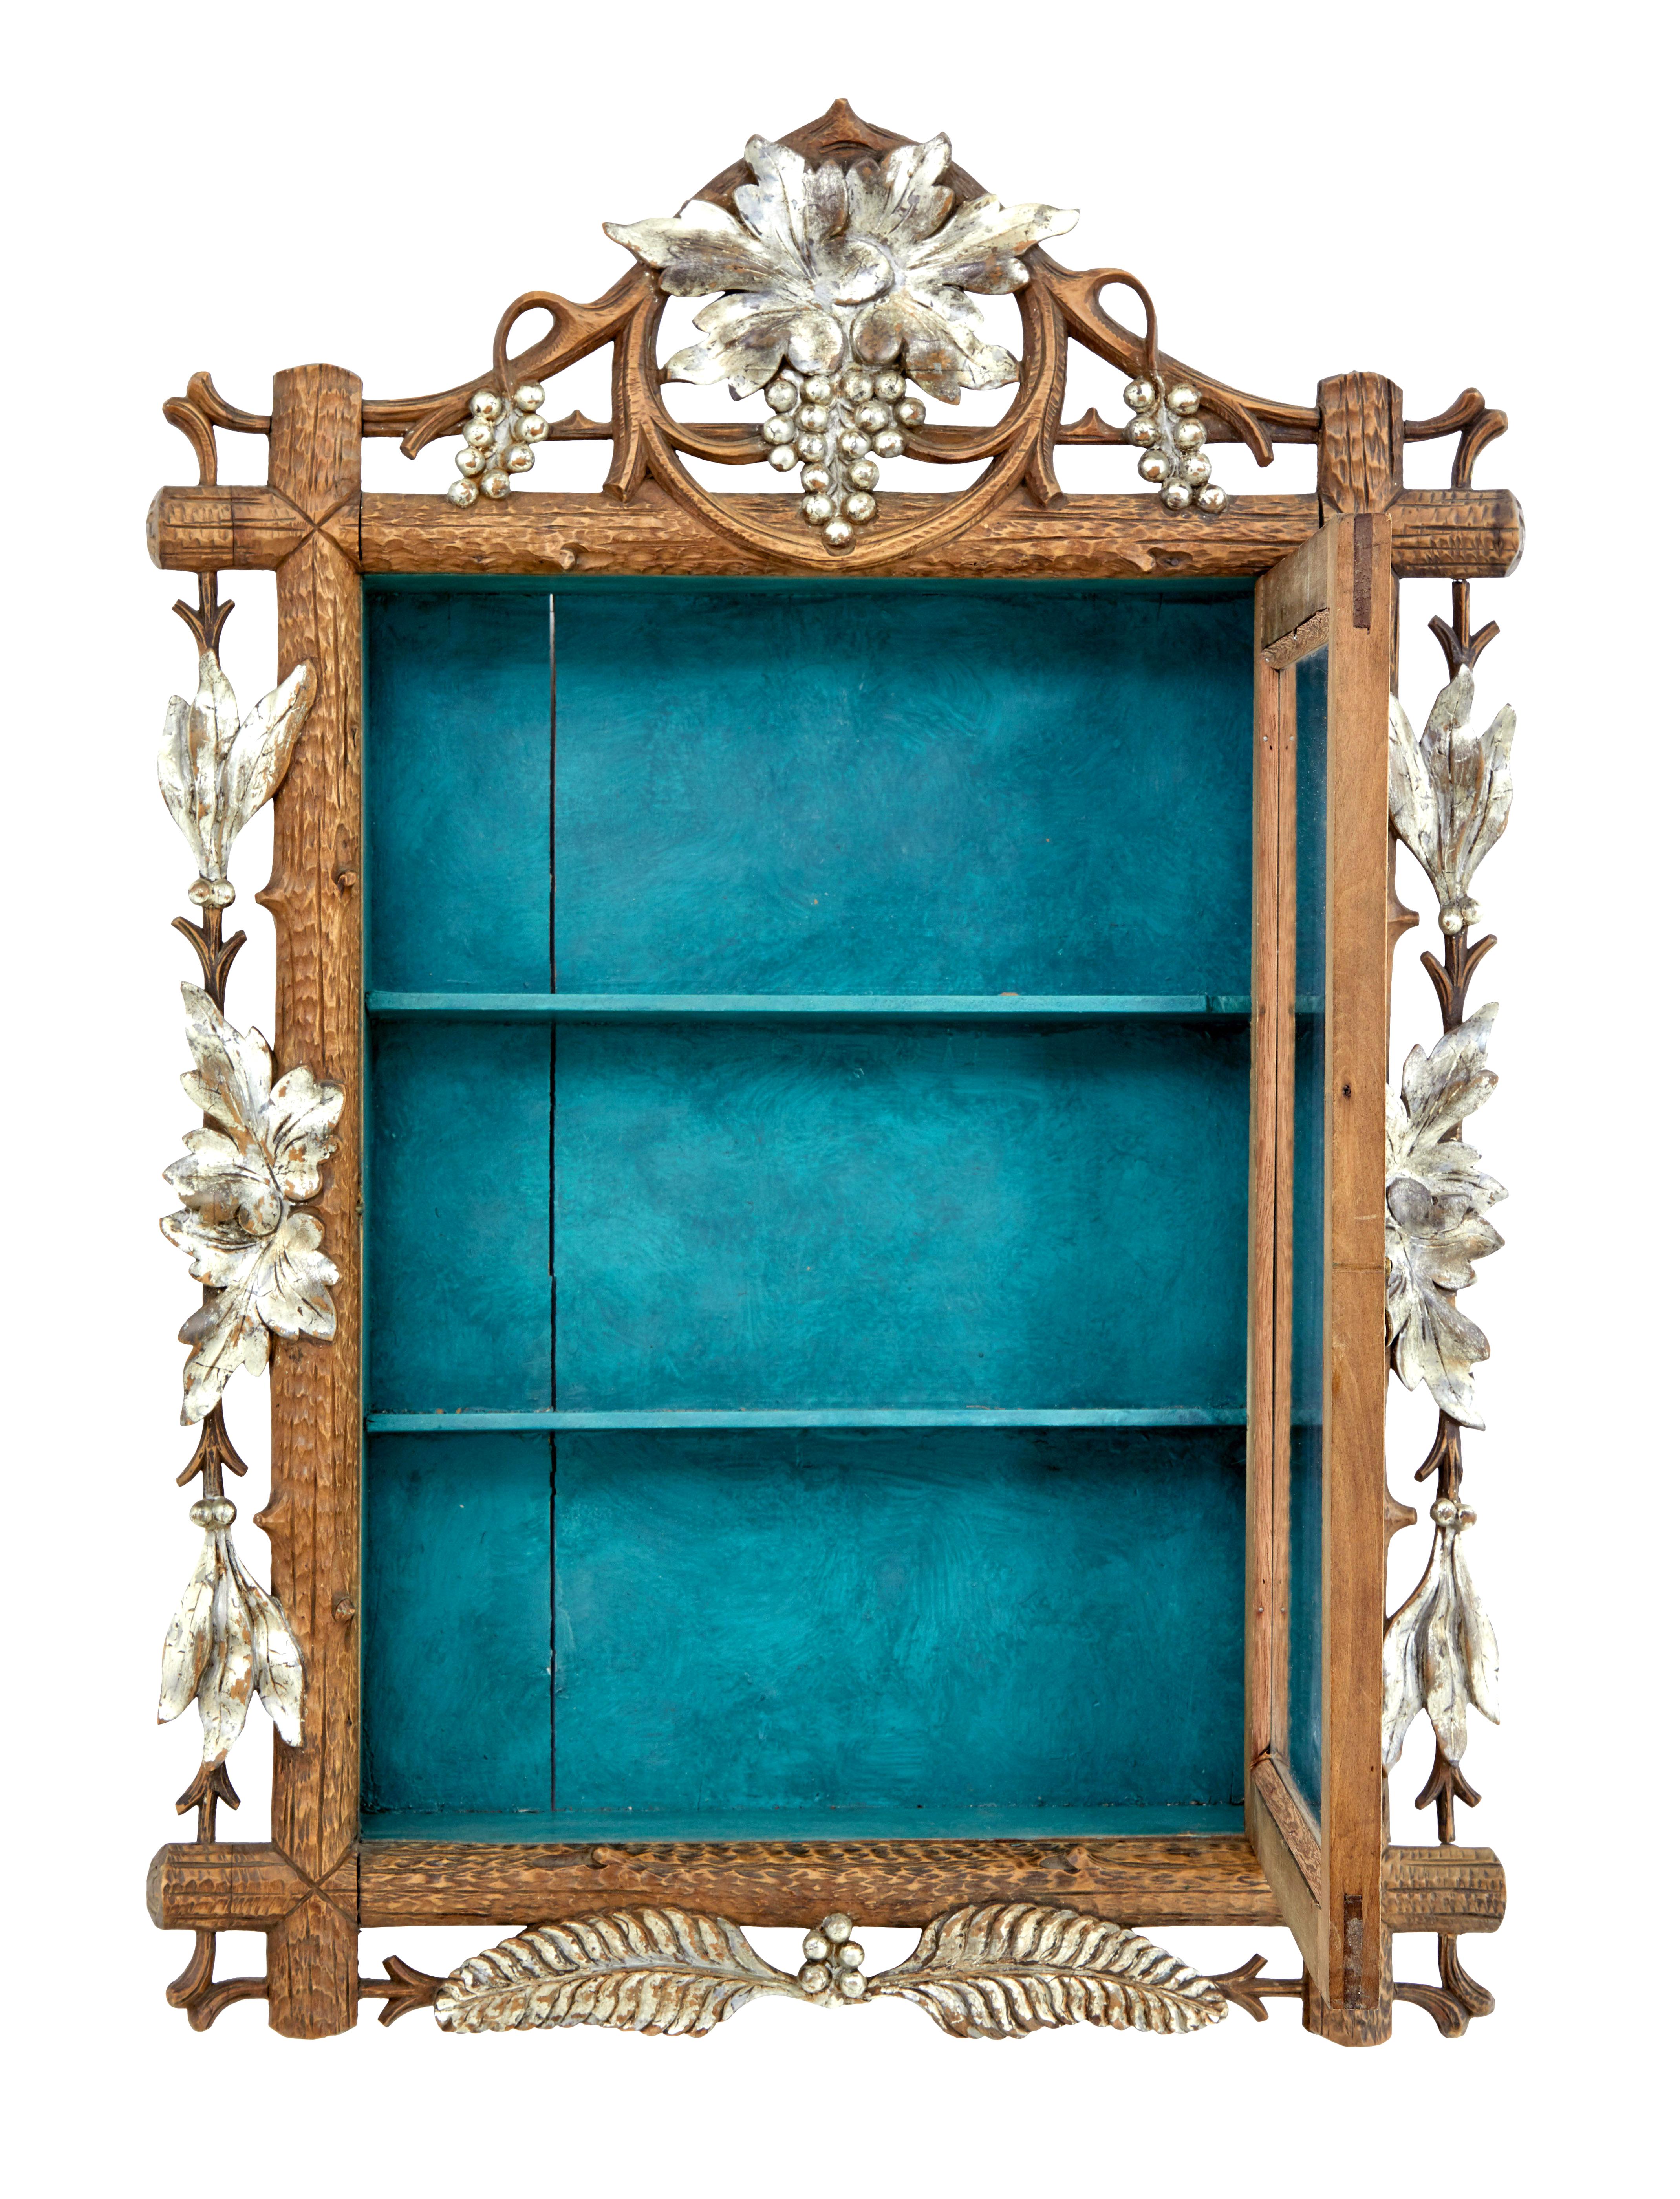 Late 19th century small Black Forest display cabinet circa 1890.

Good quality small display hanging display cabinet made from lindenwood, with silver gilt elements. Single glazed door which opens to a painted interior containing 2 narrow shelves.